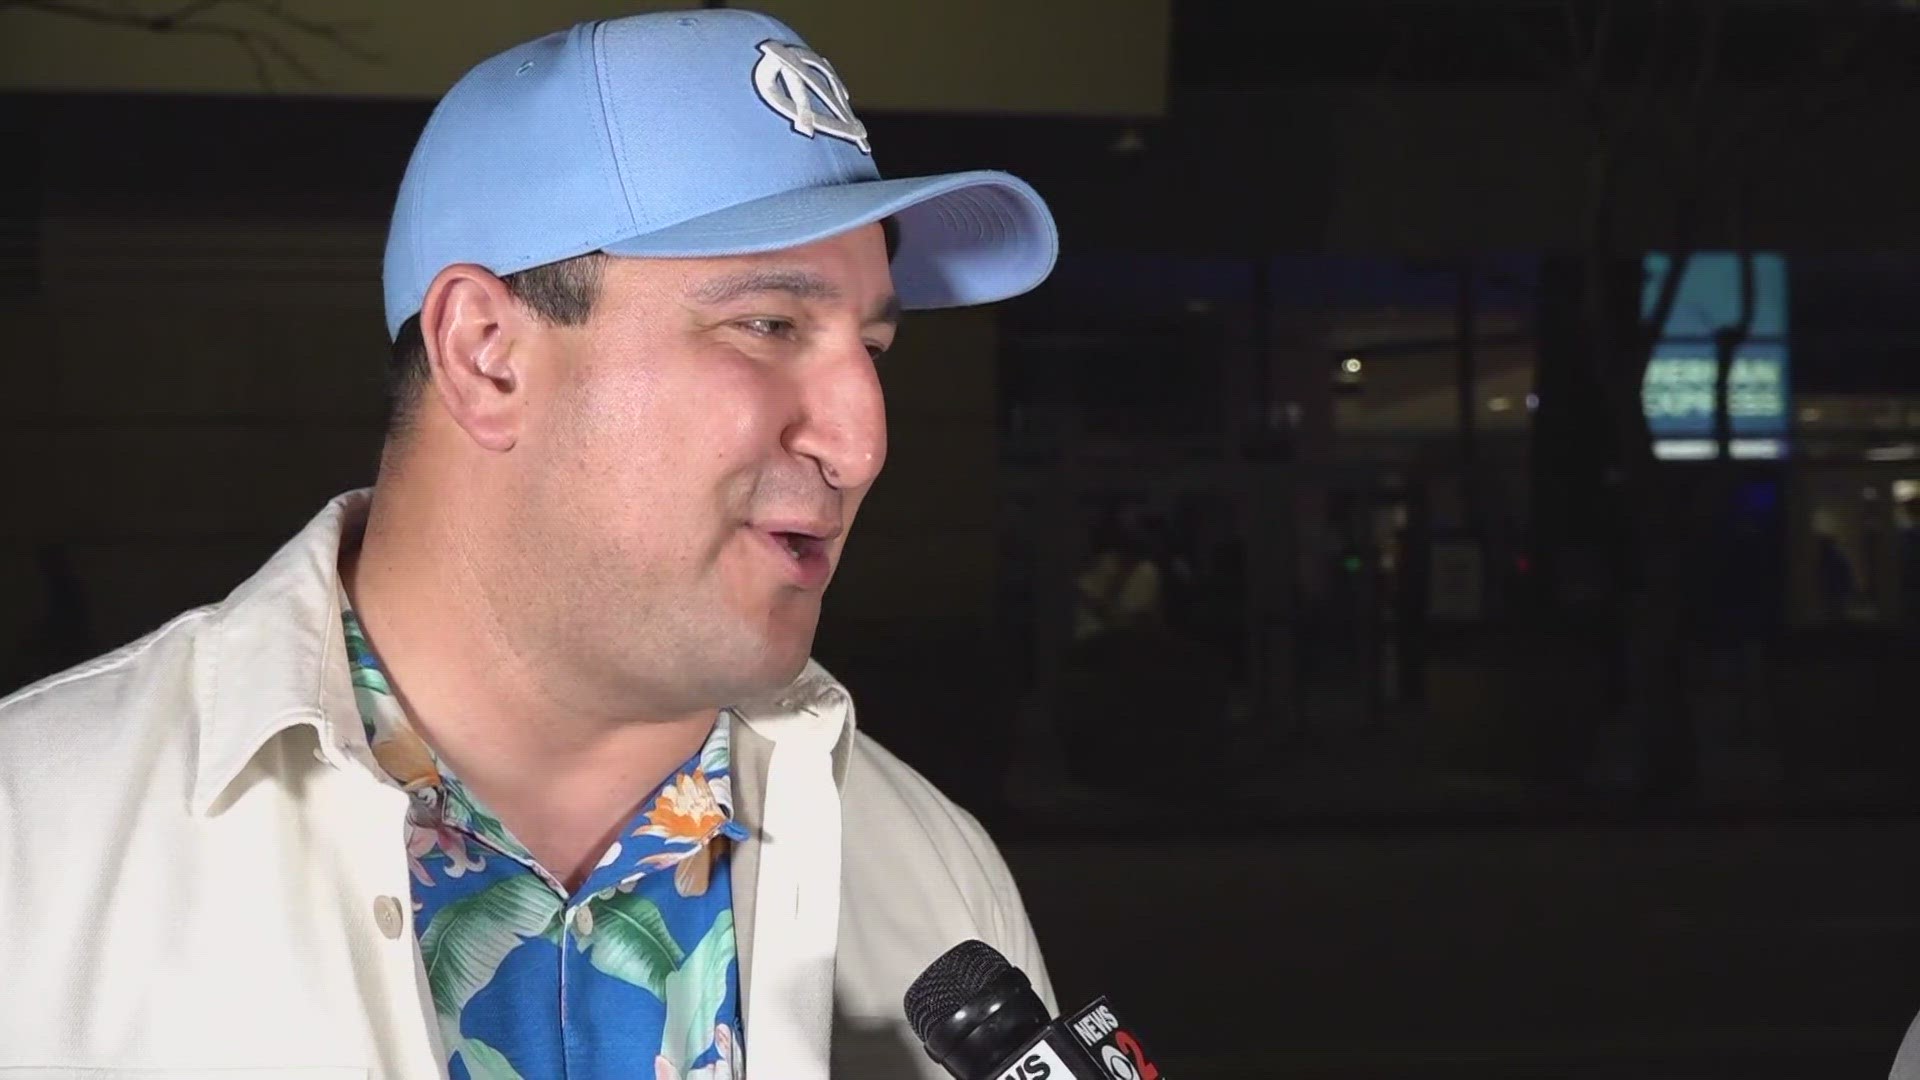 Tar Heel fans said they're sad, but they know the team has it in them to make a run next year.